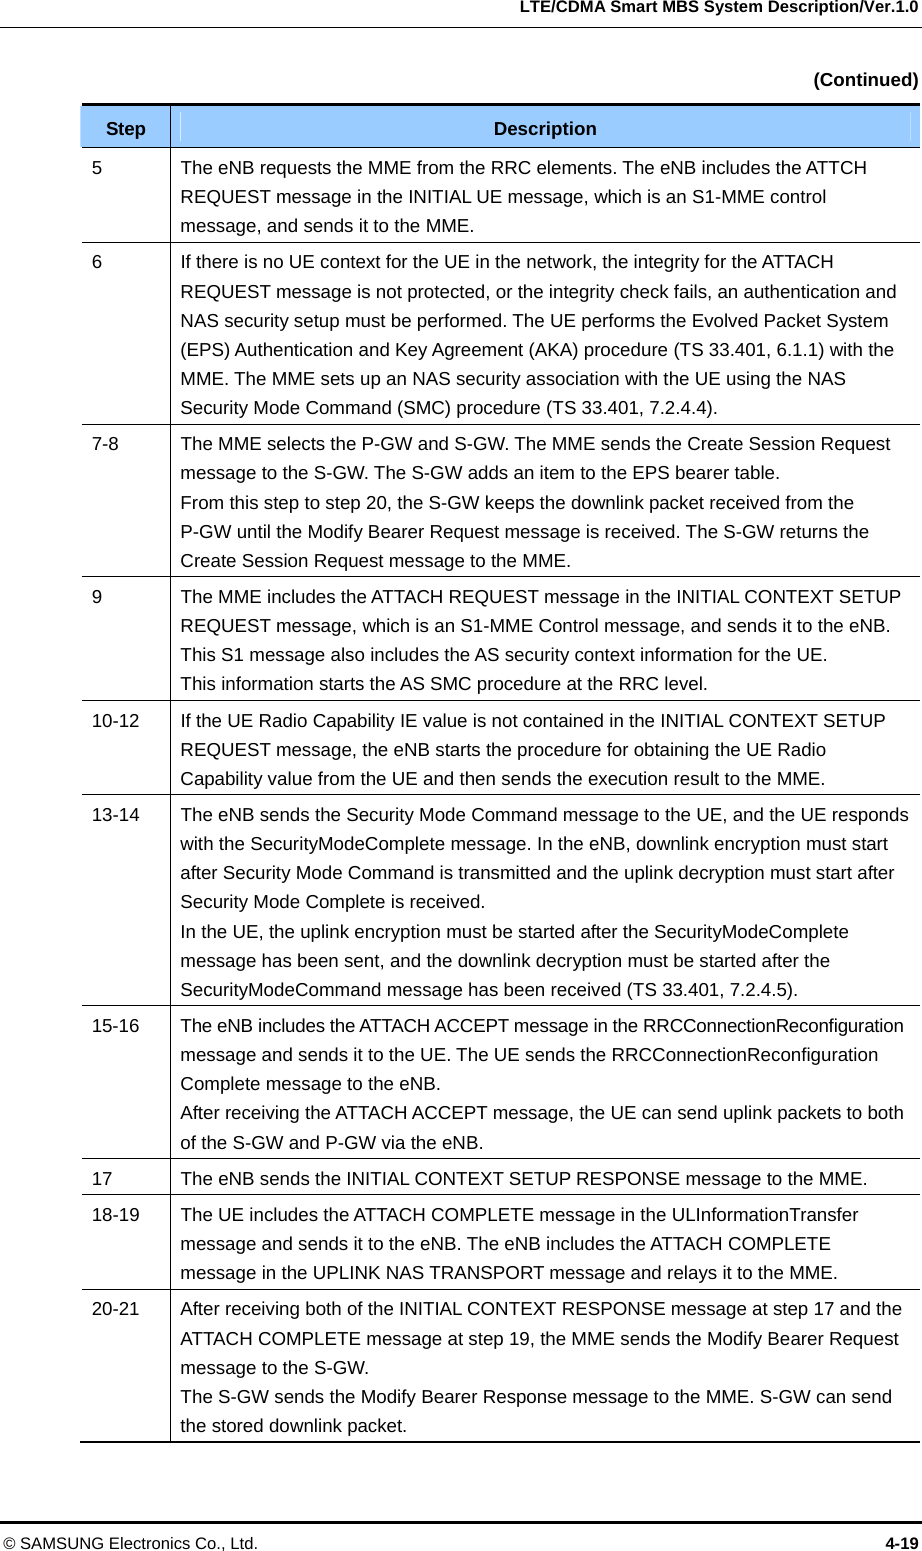   LTE/CDMA Smart MBS System Description/Ver.1.0 © SAMSUNG Electronics Co., Ltd.  4-19  (Continued) Step  Description 5  The eNB requests the MME from the RRC elements. The eNB includes the ATTCH REQUEST message in the INITIAL UE message, which is an S1-MME control message, and sends it to the MME. 6  If there is no UE context for the UE in the network, the integrity for the ATTACH REQUEST message is not protected, or the integrity check fails, an authentication and NAS security setup must be performed. The UE performs the Evolved Packet System (EPS) Authentication and Key Agreement (AKA) procedure (TS 33.401, 6.1.1) with the MME. The MME sets up an NAS security association with the UE using the NAS Security Mode Command (SMC) procedure (TS 33.401, 7.2.4.4). 7-8  The MME selects the P-GW and S-GW. The MME sends the Create Session Request message to the S-GW. The S-GW adds an item to the EPS bearer table. From this step to step 20, the S-GW keeps the downlink packet received from the   P-GW until the Modify Bearer Request message is received. The S-GW returns the Create Session Request message to the MME. 9  The MME includes the ATTACH REQUEST message in the INITIAL CONTEXT SETUP REQUEST message, which is an S1-MME Control message, and sends it to the eNB. This S1 message also includes the AS security context information for the UE.   This information starts the AS SMC procedure at the RRC level. 10-12  If the UE Radio Capability IE value is not contained in the INITIAL CONTEXT SETUP REQUEST message, the eNB starts the procedure for obtaining the UE Radio Capability value from the UE and then sends the execution result to the MME. 13-14  The eNB sends the Security Mode Command message to the UE, and the UE responds with the SecurityModeComplete message. In the eNB, downlink encryption must start after Security Mode Command is transmitted and the uplink decryption must start after Security Mode Complete is received. In the UE, the uplink encryption must be started after the SecurityModeComplete message has been sent, and the downlink decryption must be started after the SecurityModeCommand message has been received (TS 33.401, 7.2.4.5). 15-16  The eNB includes the ATTACH ACCEPT message in the RRCConnectionReconfiguration message and sends it to the UE. The UE sends the RRCConnectionReconfiguration Complete message to the eNB. After receiving the ATTACH ACCEPT message, the UE can send uplink packets to both of the S-GW and P-GW via the eNB. 17  The eNB sends the INITIAL CONTEXT SETUP RESPONSE message to the MME. 18-19  The UE includes the ATTACH COMPLETE message in the ULInformationTransfer message and sends it to the eNB. The eNB includes the ATTACH COMPLETE message in the UPLINK NAS TRANSPORT message and relays it to the MME. 20-21  After receiving both of the INITIAL CONTEXT RESPONSE message at step 17 and the ATTACH COMPLETE message at step 19, the MME sends the Modify Bearer Request message to the S-GW.   The S-GW sends the Modify Bearer Response message to the MME. S-GW can send the stored downlink packet. 